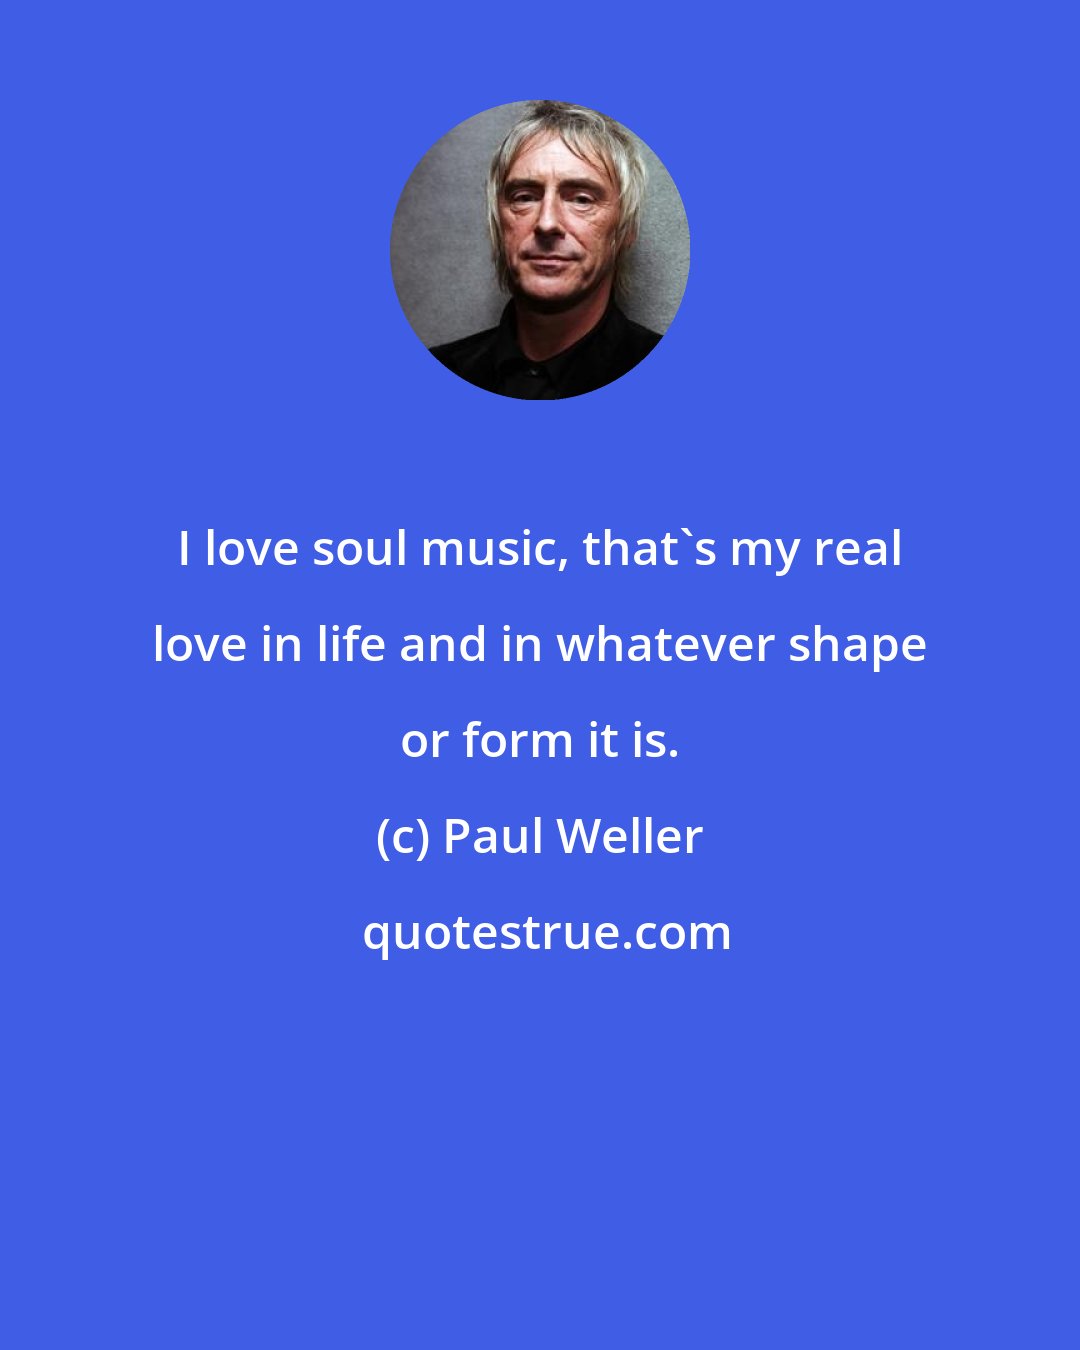 Paul Weller: I love soul music, that's my real love in life and in whatever shape or form it is.